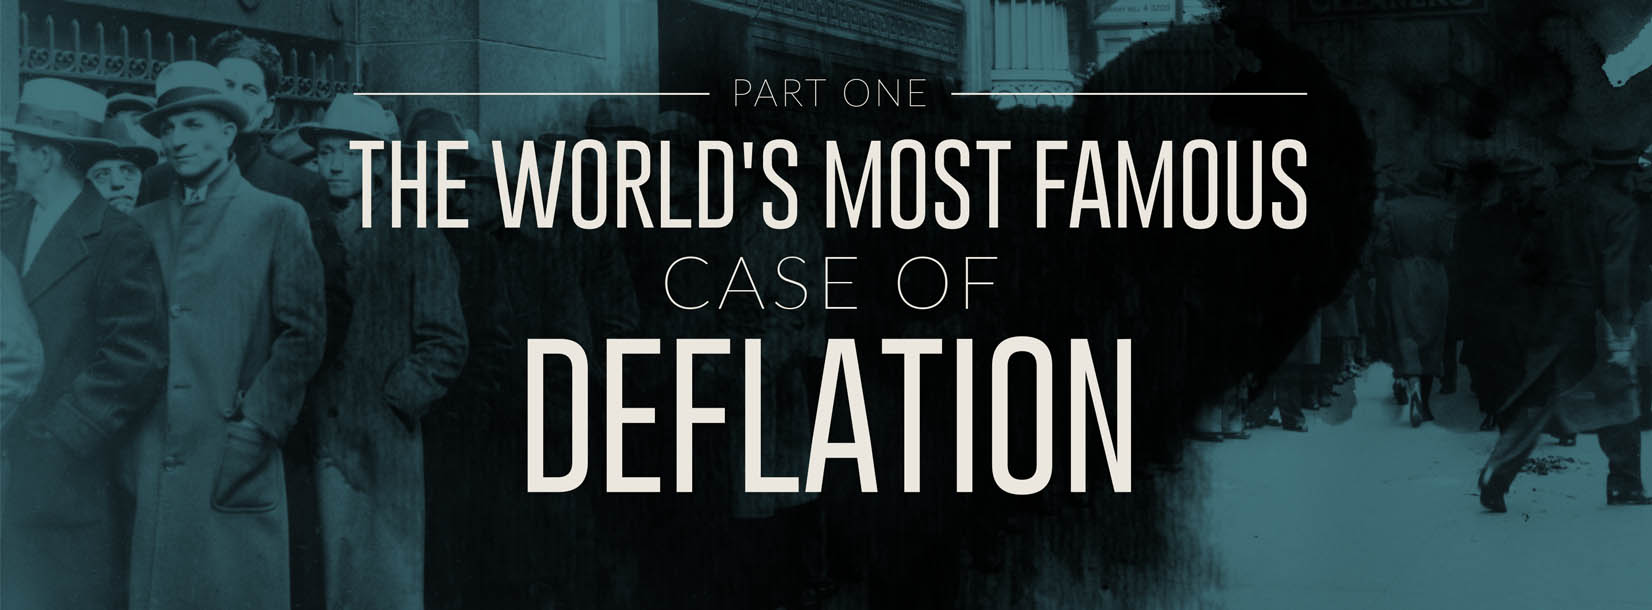 The World's Most Famous Case of Deflation Pt. 1 (Infographic)